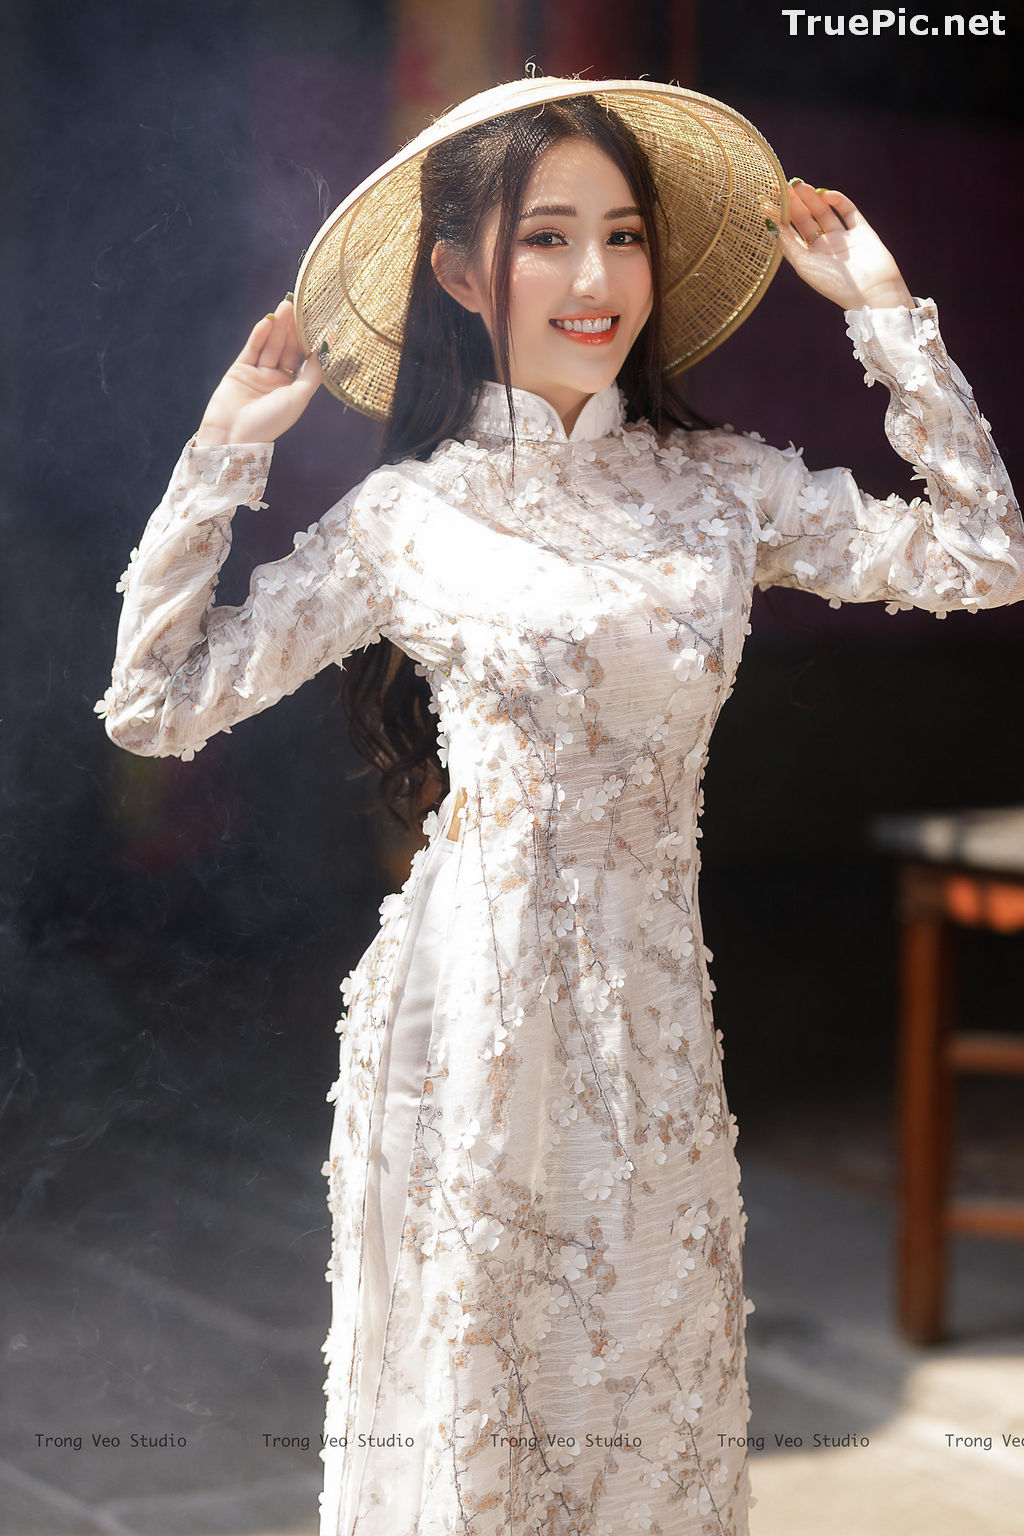 Image The Beauty of Vietnamese Girls with Traditional Dress (Ao Dai) #2 - TruePic.net - Picture-17